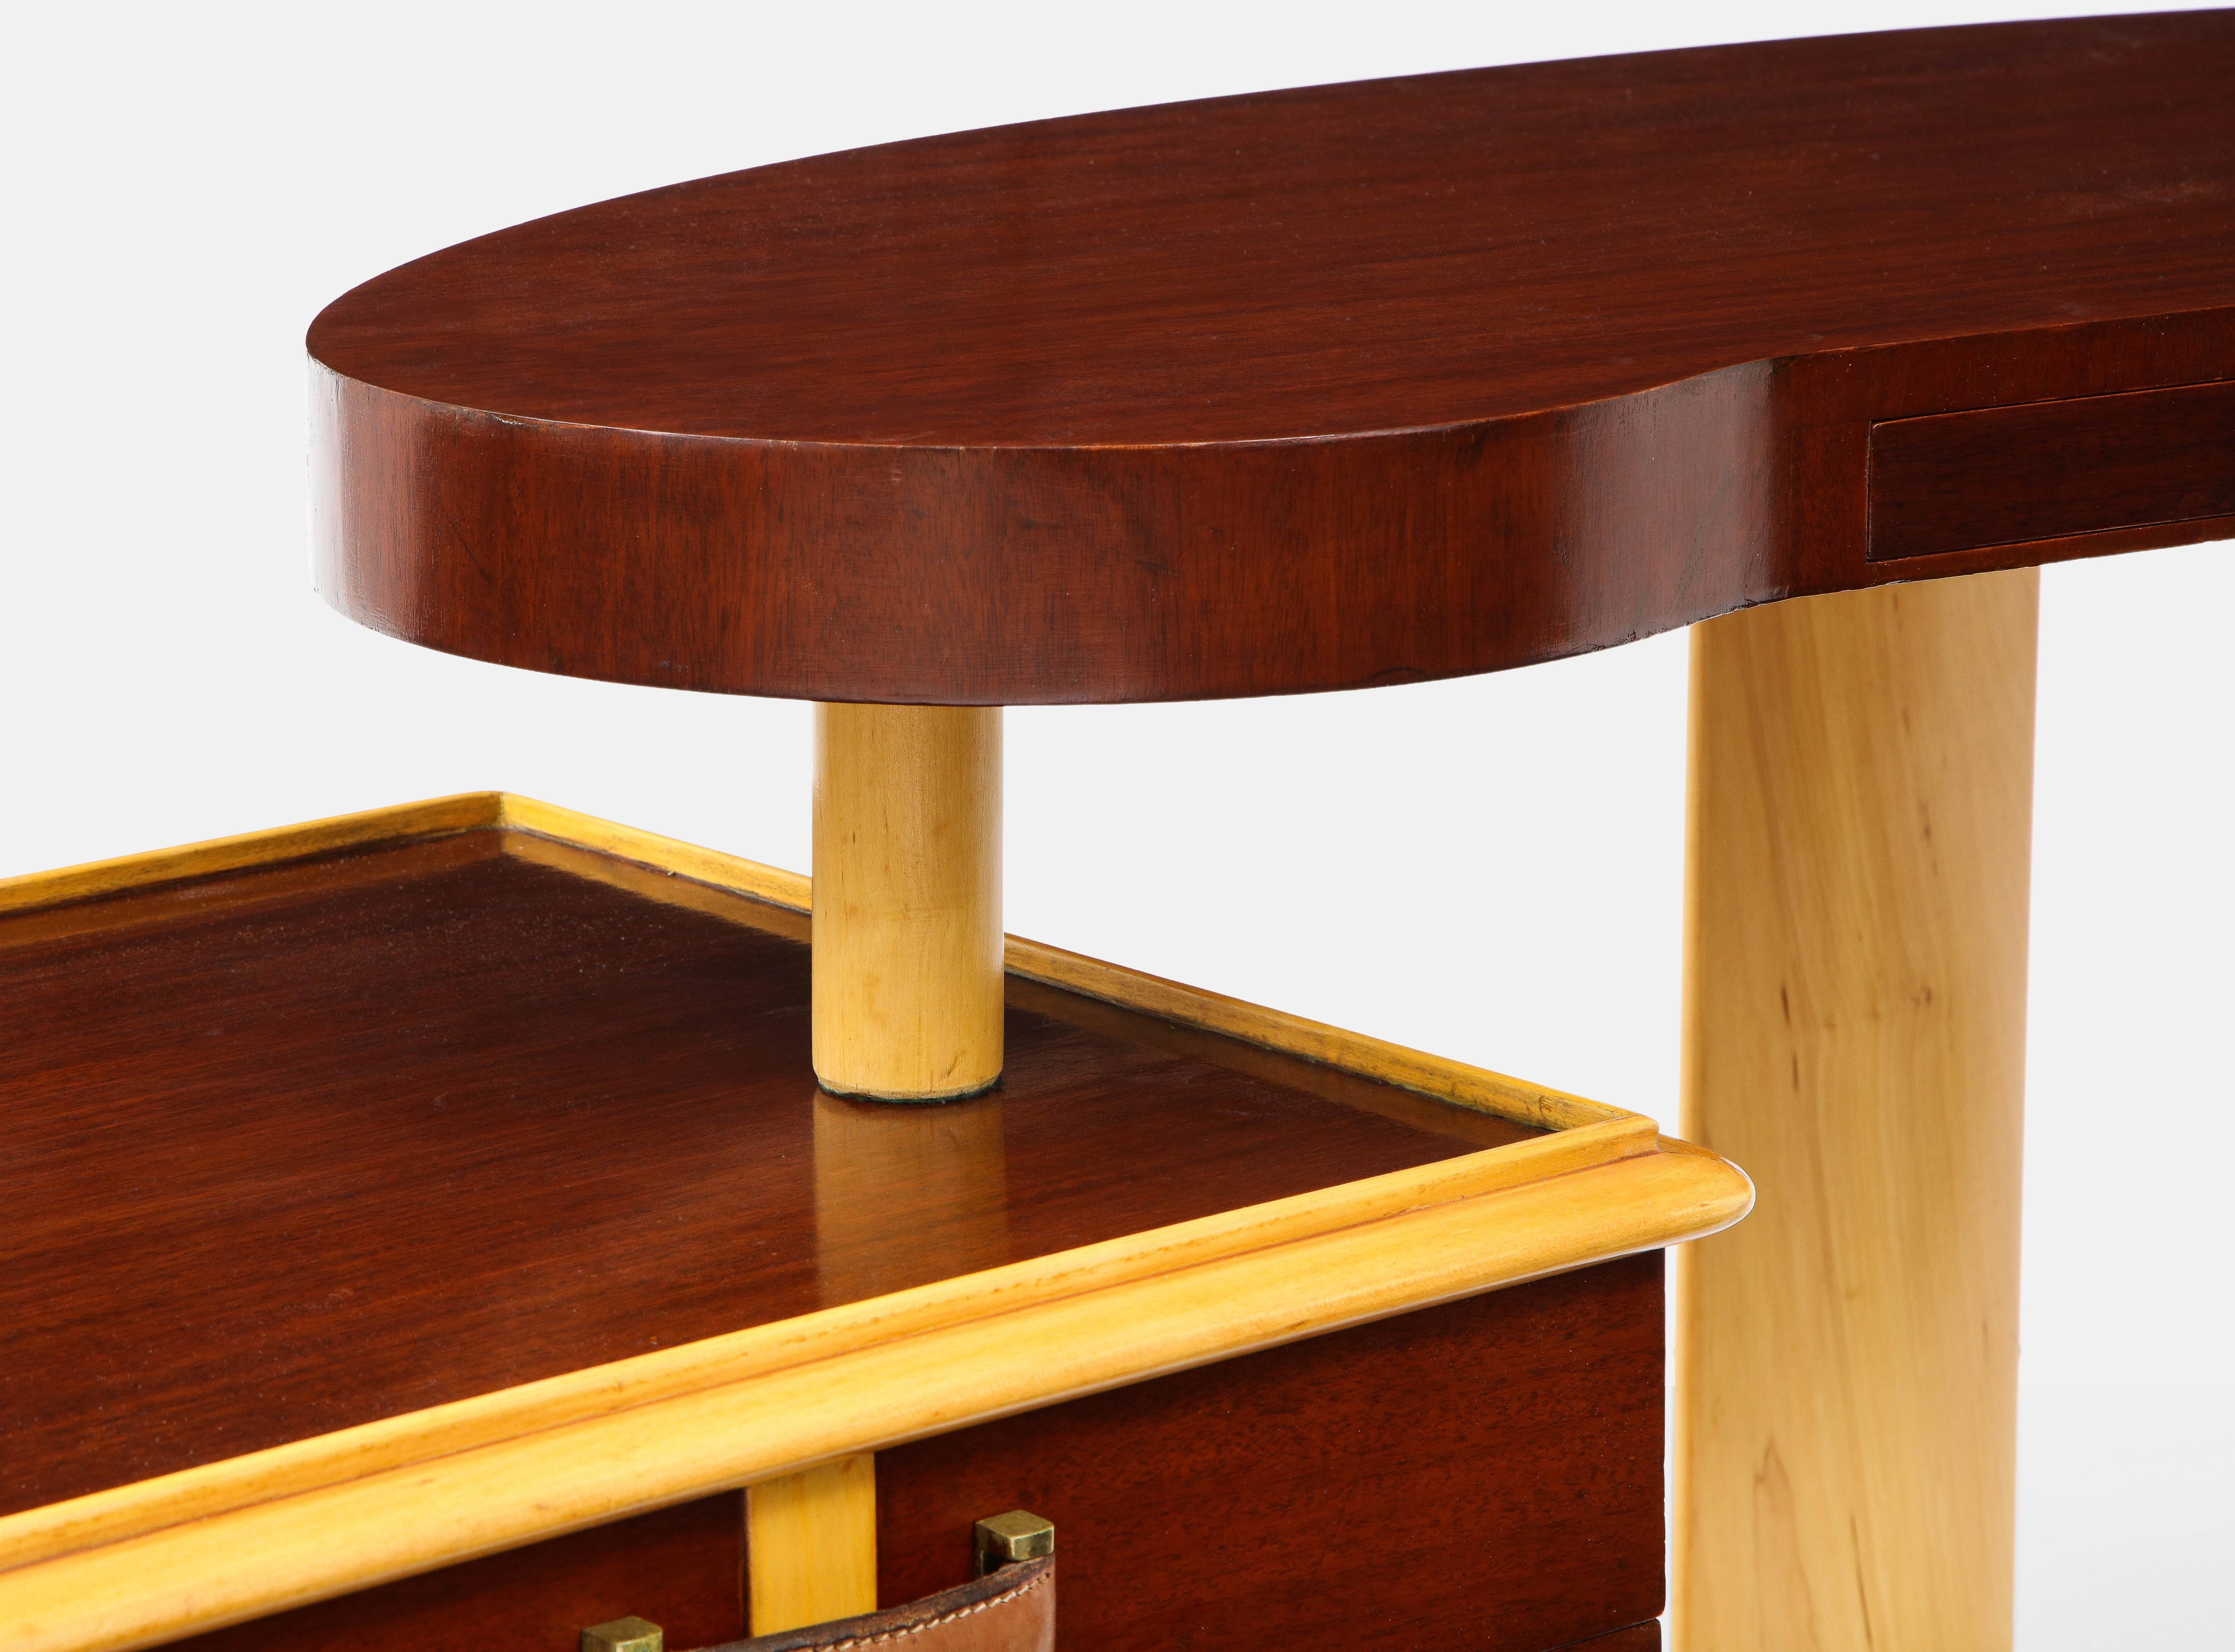 Paul Frankl Rare Kidney Desk in Mahogany, Birch, Leather and Brass, USA, 1950s For Sale 4